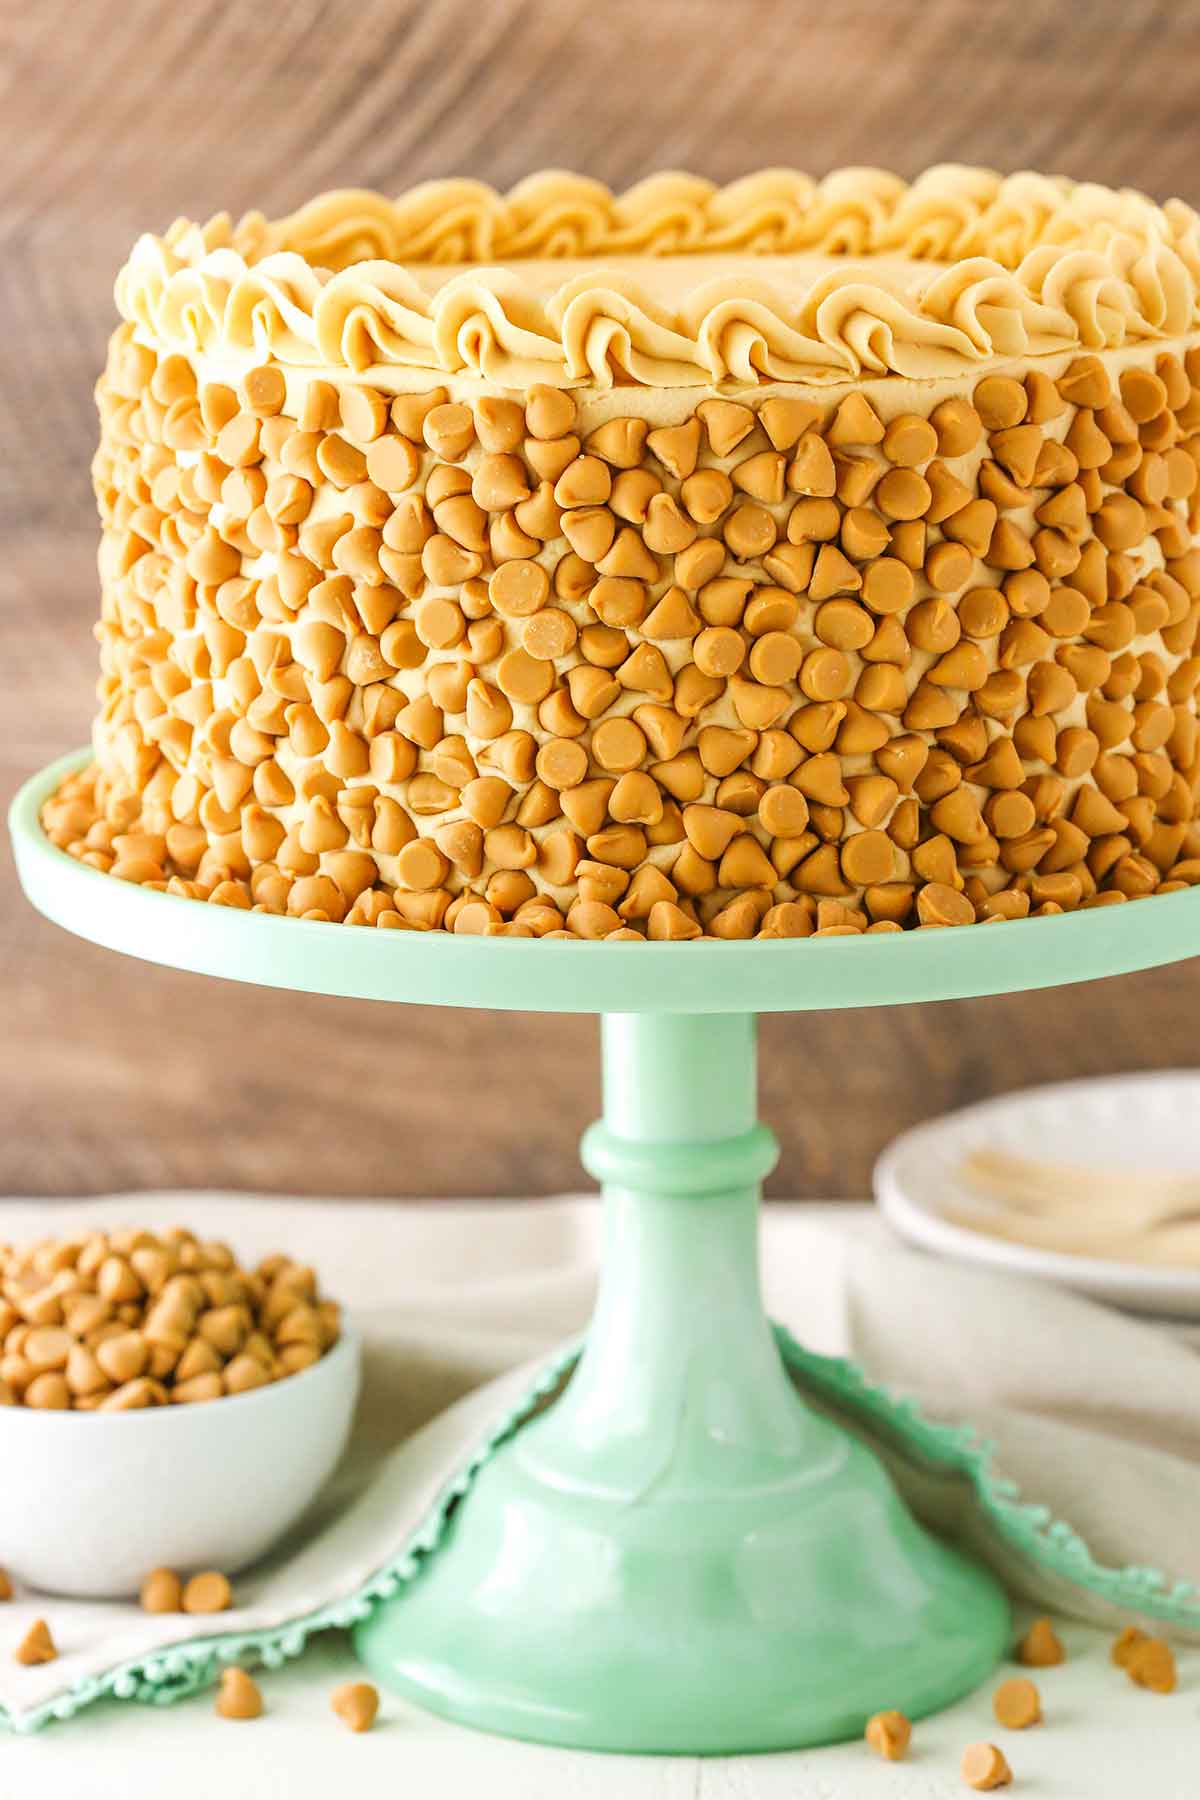 Side view of a full Ultimate Butterscotch Cake on a green cake stand